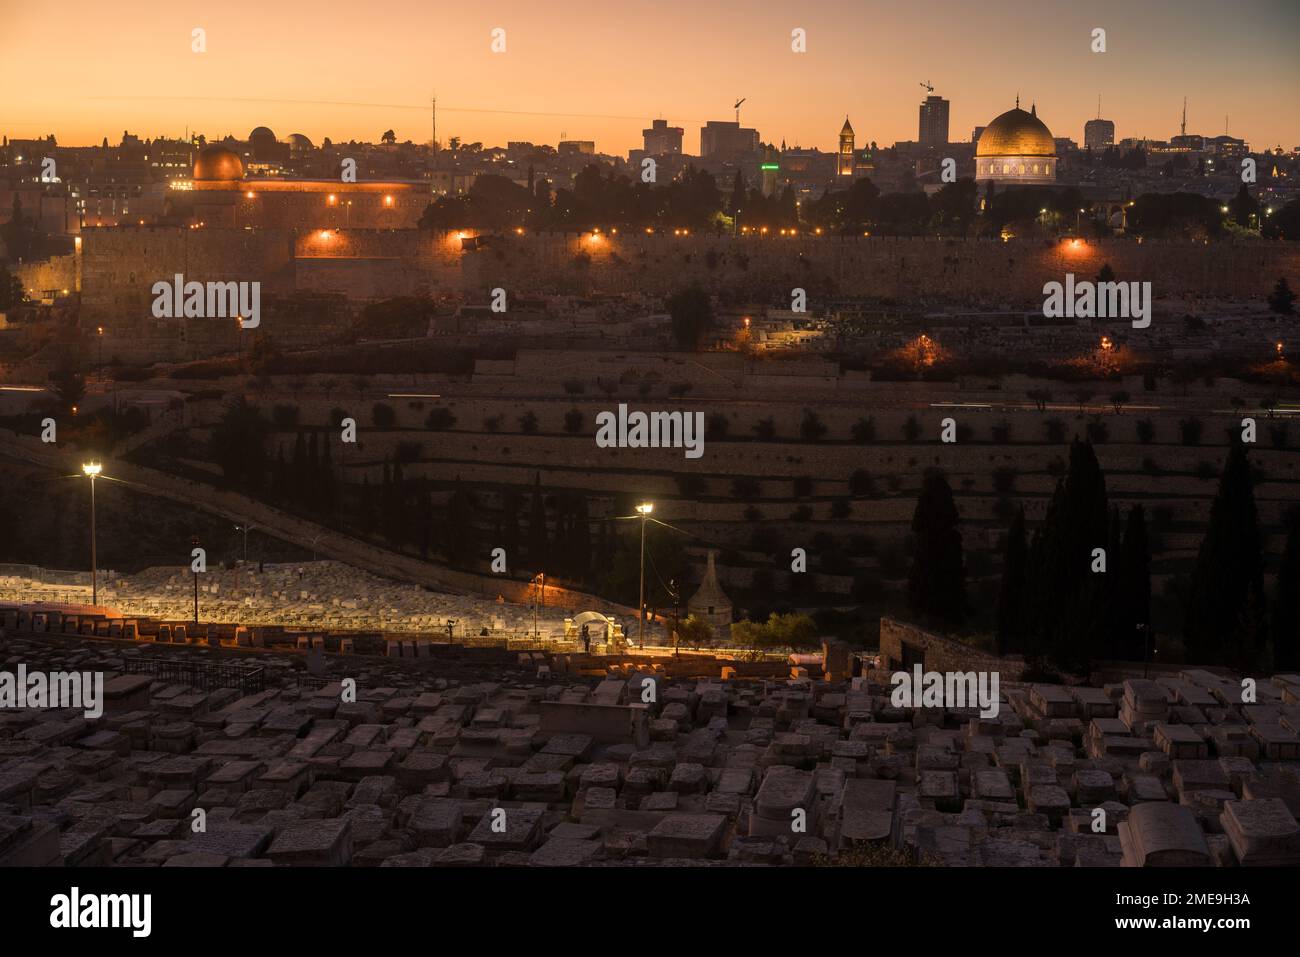 Dome of the Rock as viewed from the Mount of Olives, Jerusalem, Israel. Stock Photo